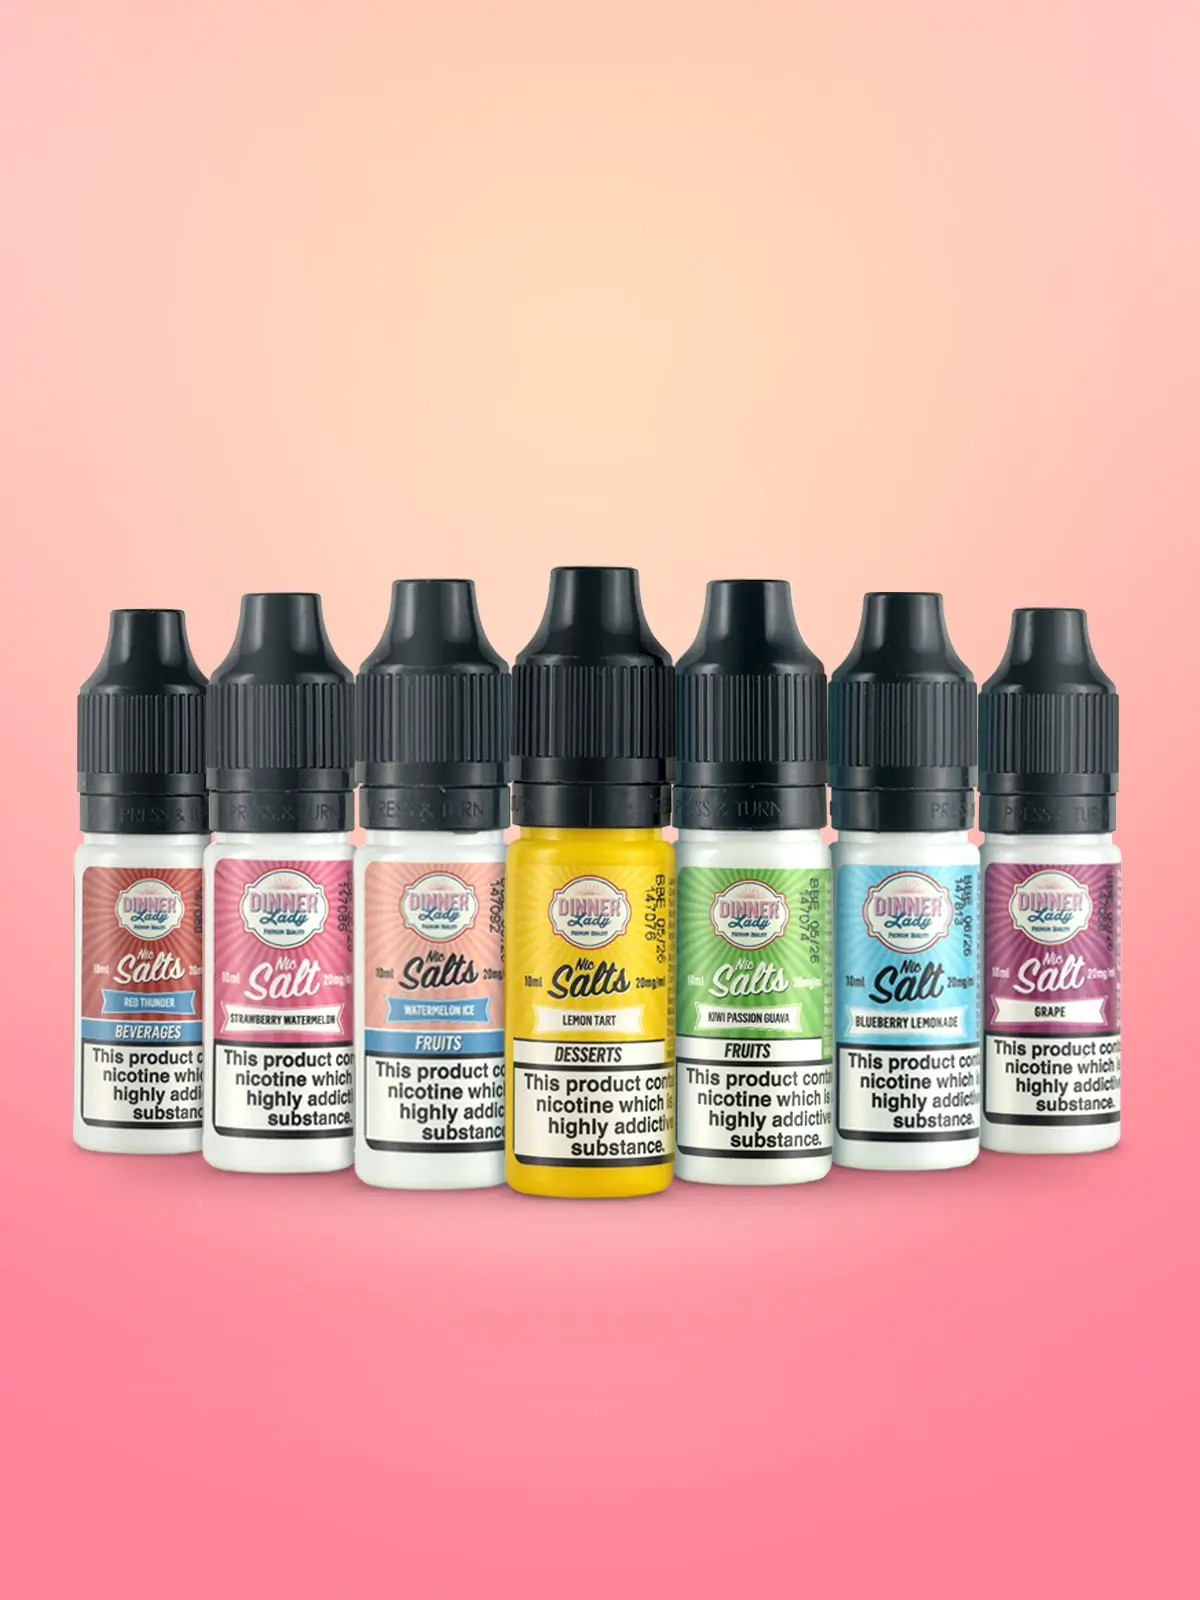 Seven bottles of various Dinner Lady e-liquids in a v-shape formation in front of a pink background